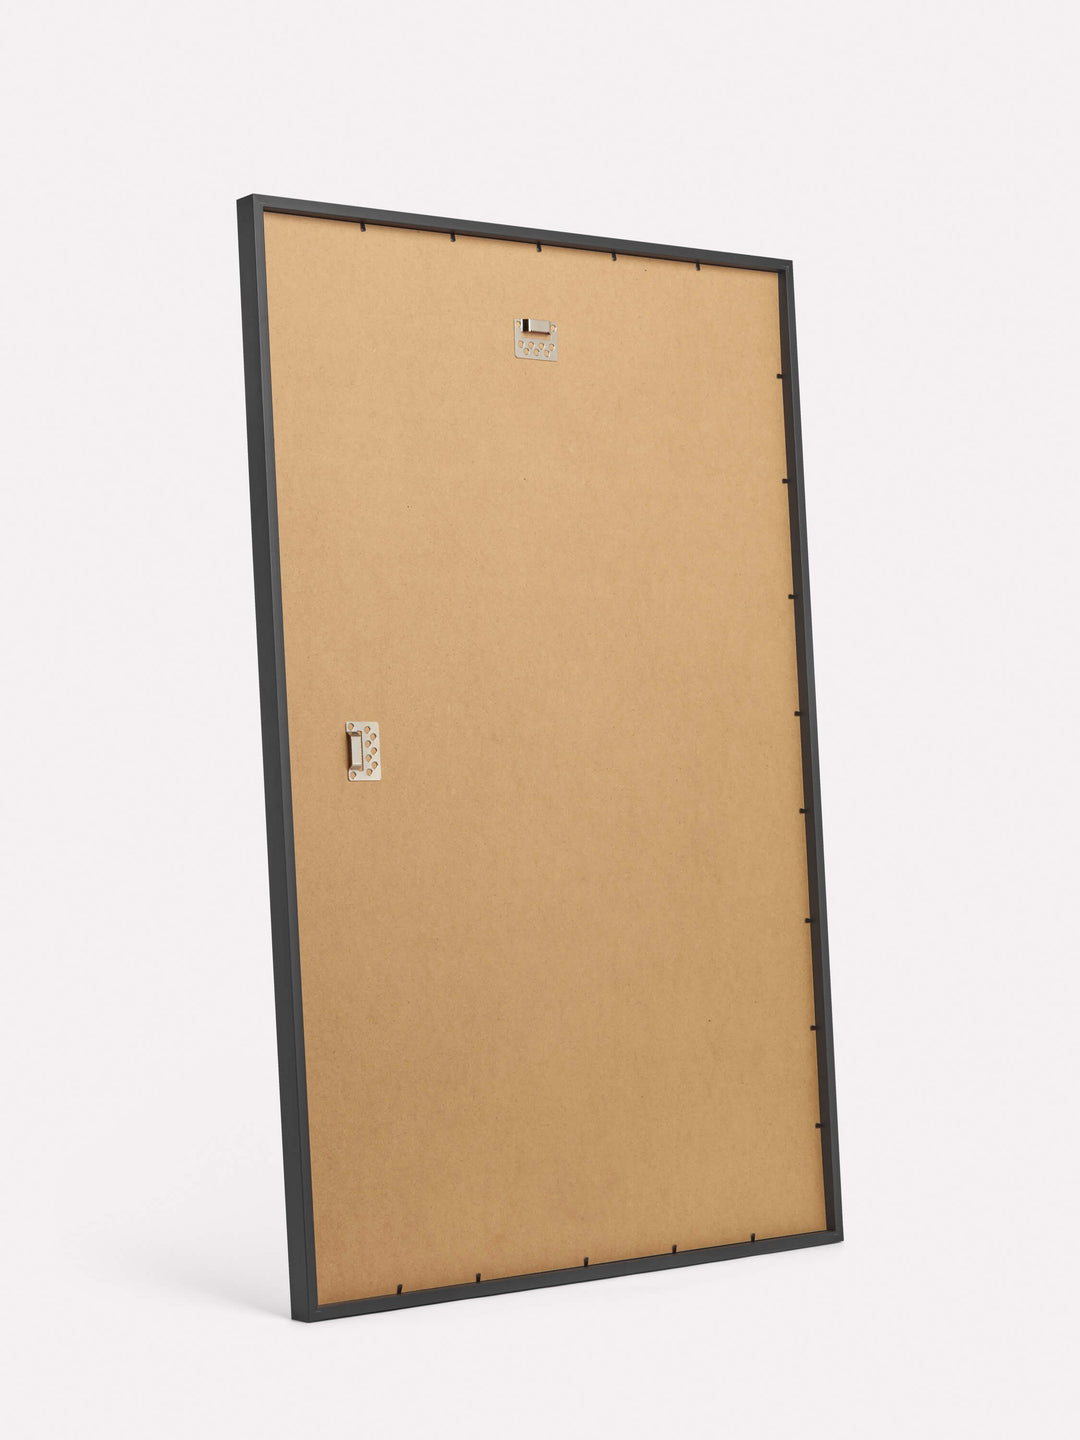 24x36-inch Classic Frame, Black - Back view